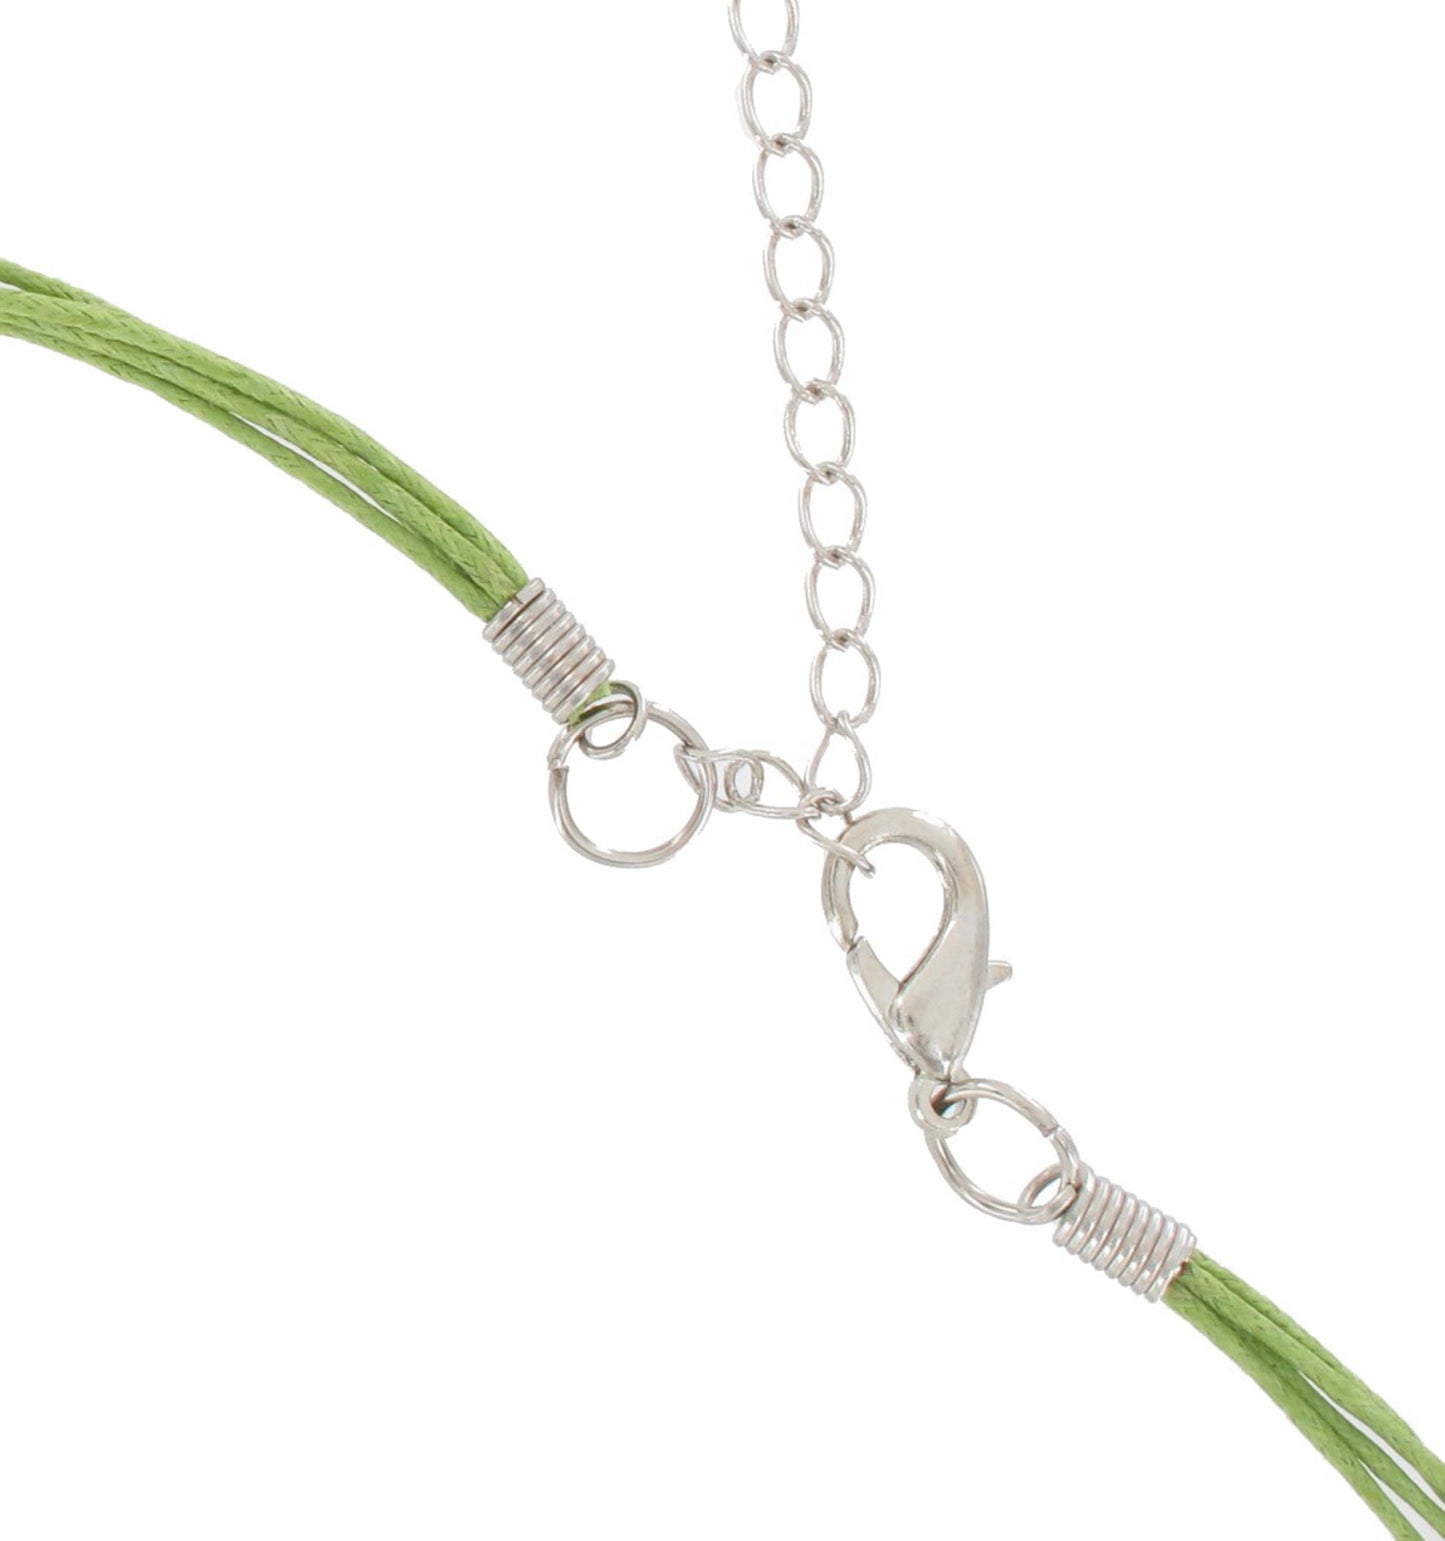 Green Fringe Mother of Pearl Multistrand Cord Pendant Necklace 17-19"